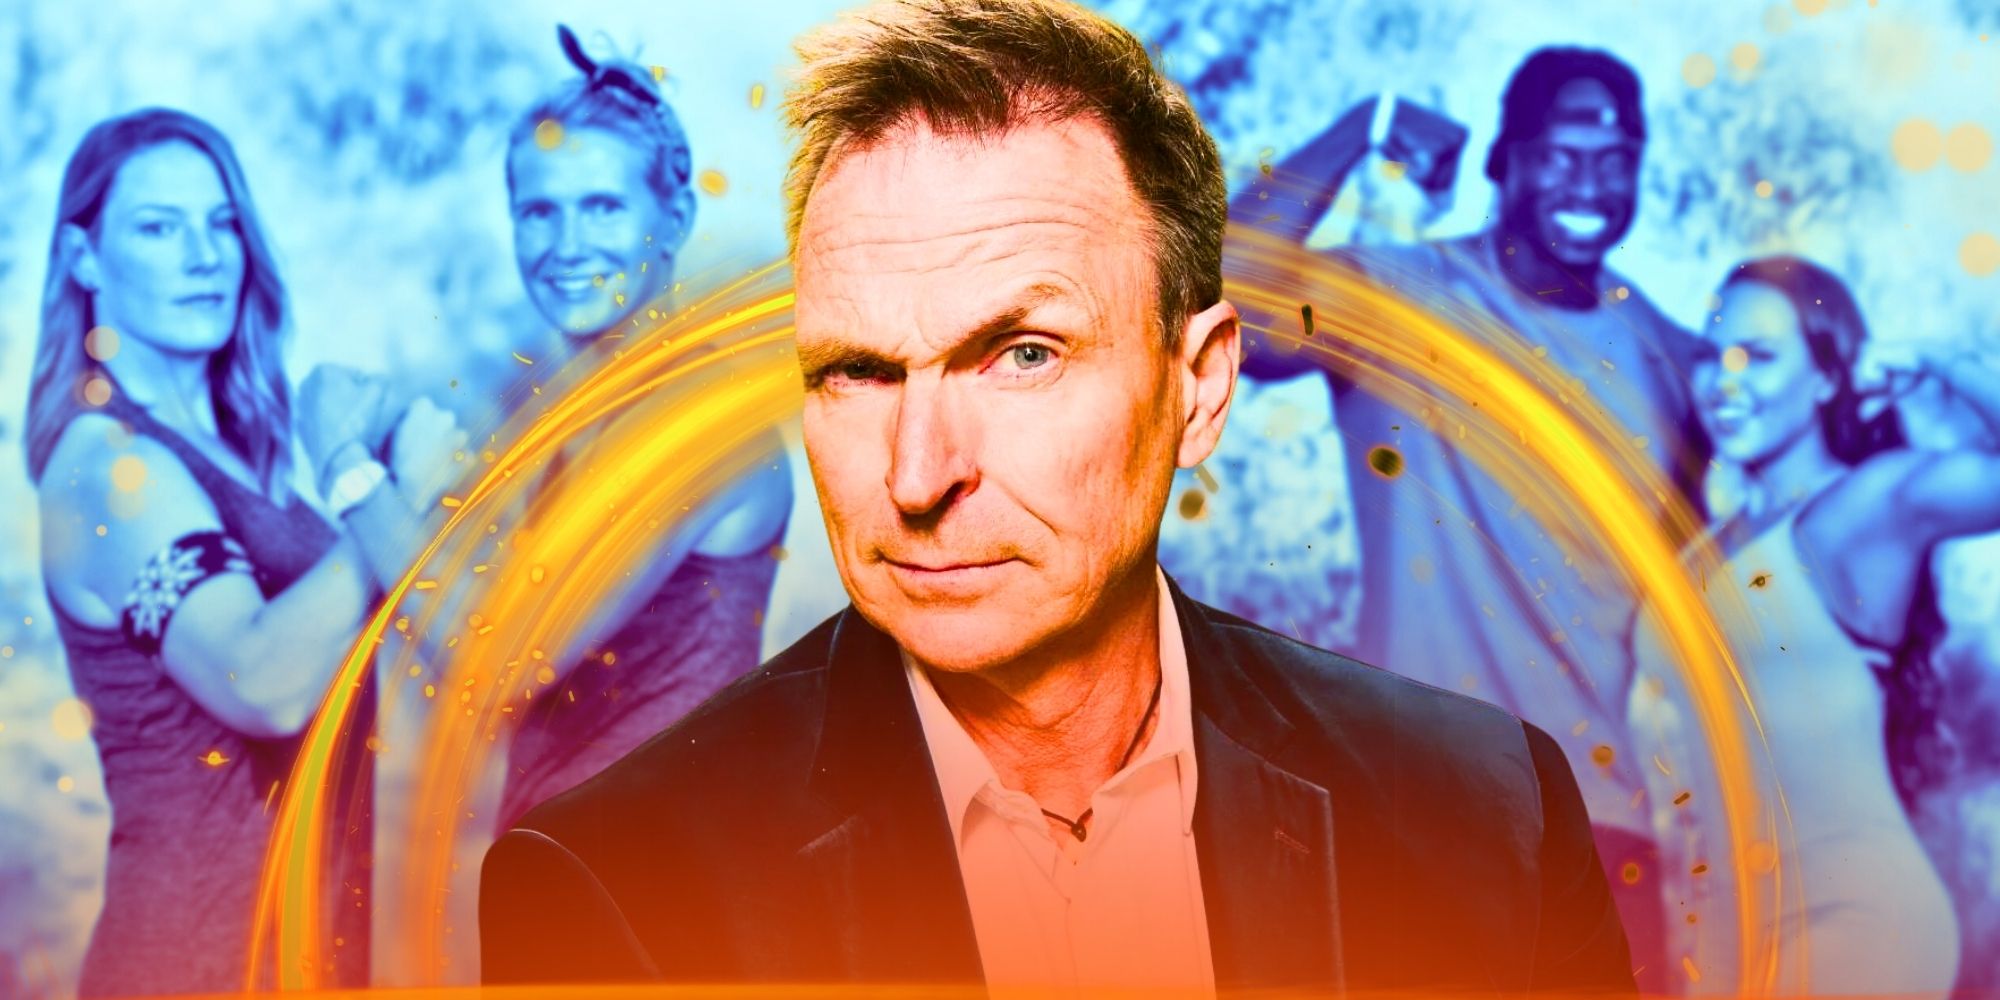 Host Phil Keoghan with two The Amazing Race season 36 teams in the background